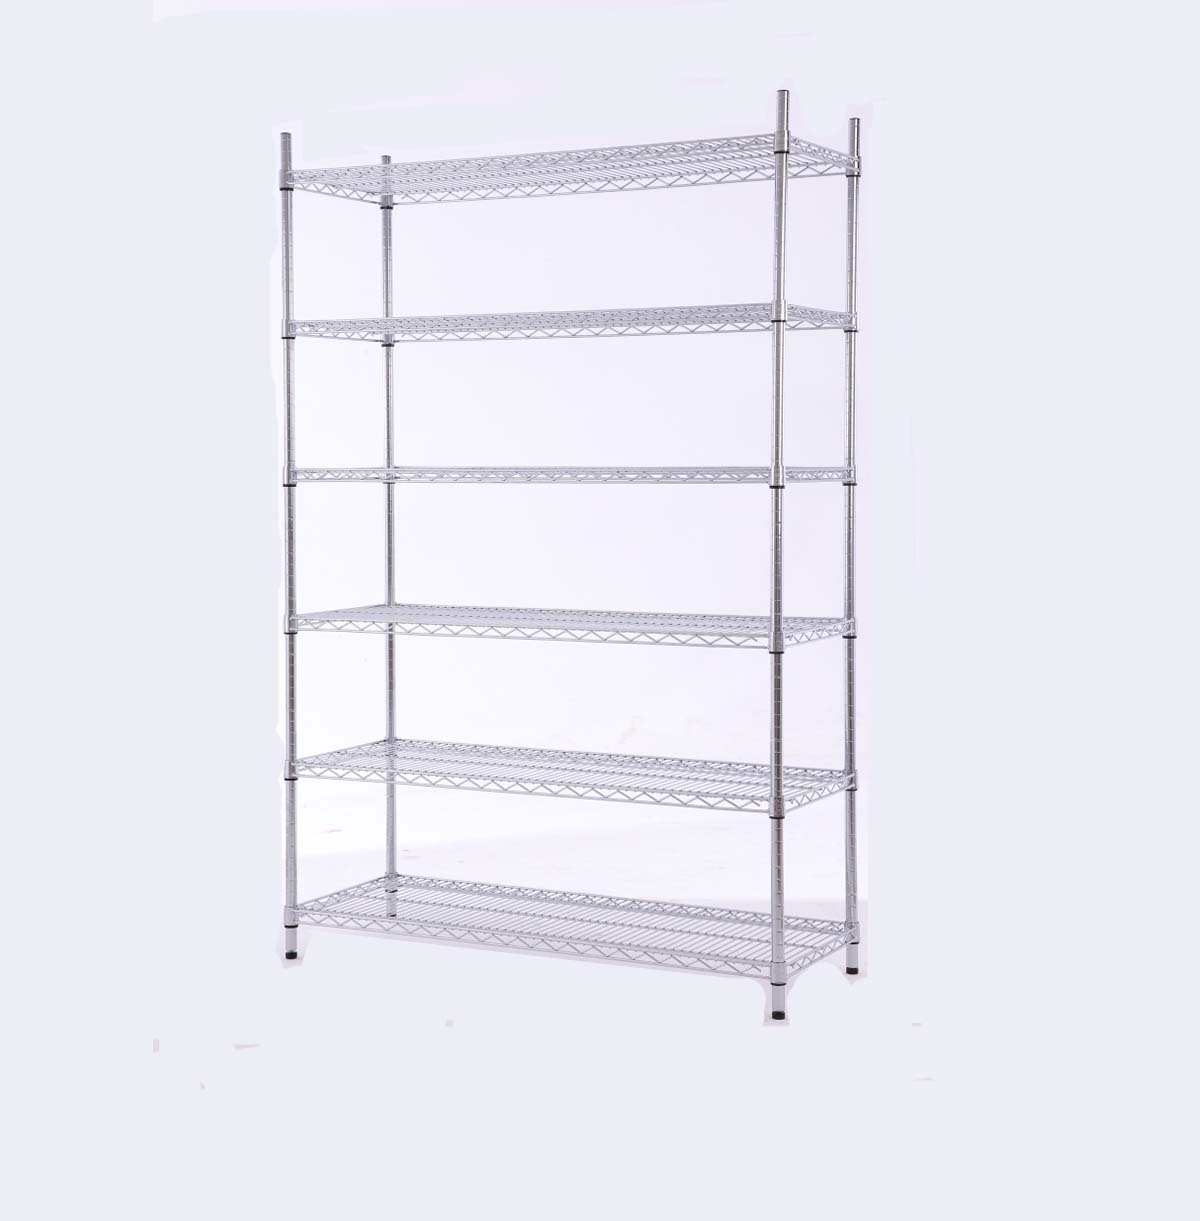 stainless steel wire rack shelving.The relationship between pallet shelves and heavy-duty shelves